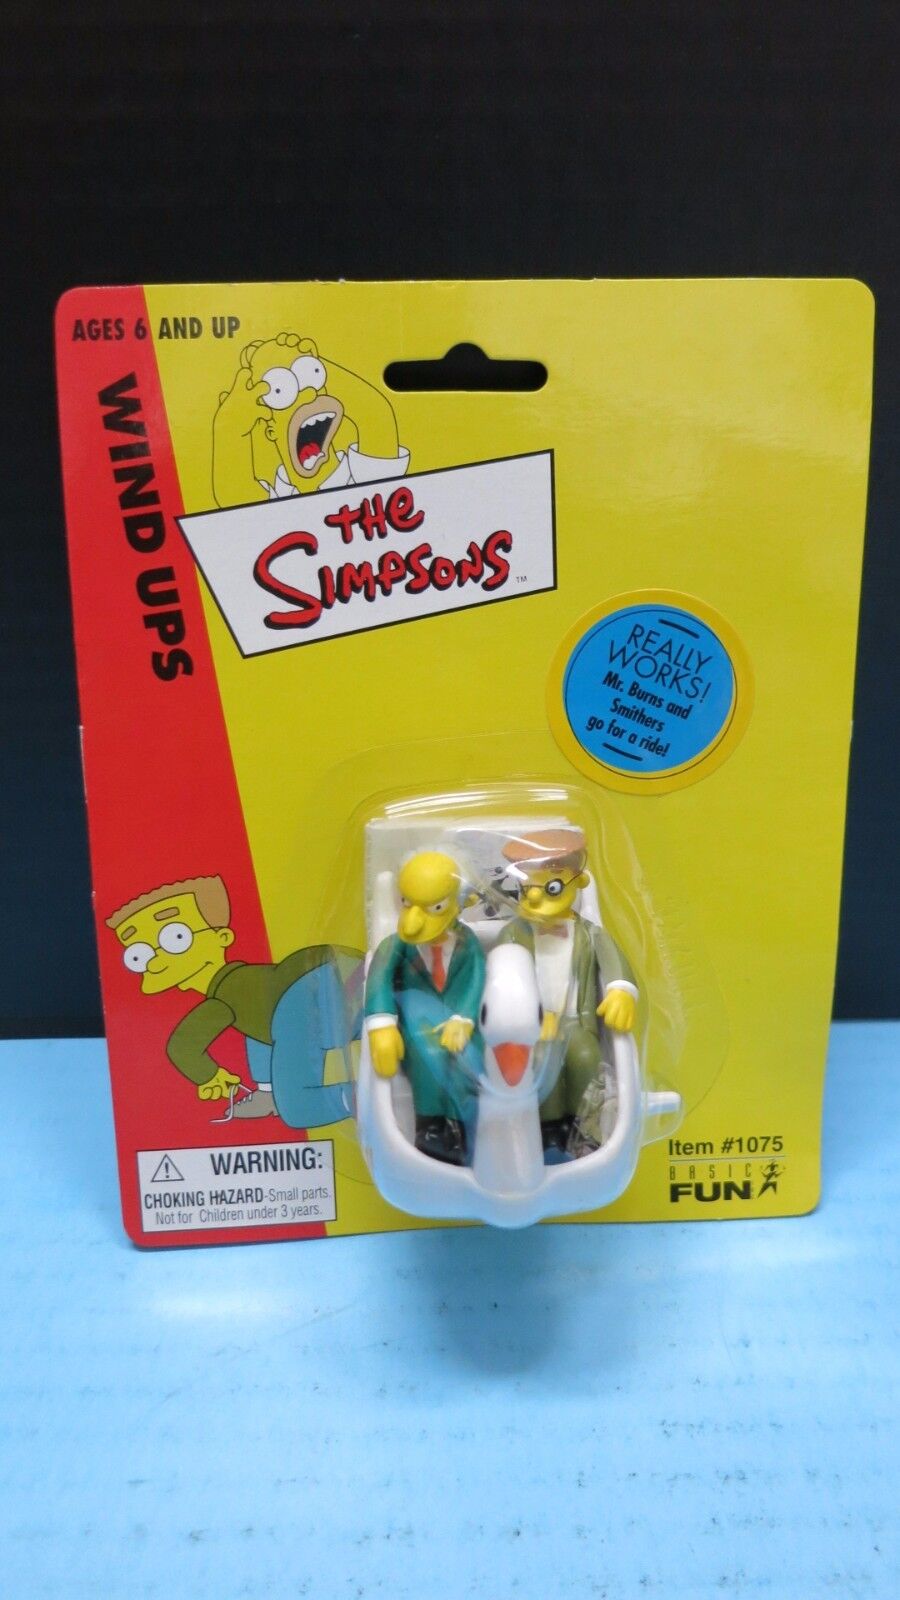 THE SIMPSONS WIND UPS MR BURNS SMITHERS GO FOR A RIDE BASIC FUN #1075 SEALED NEW